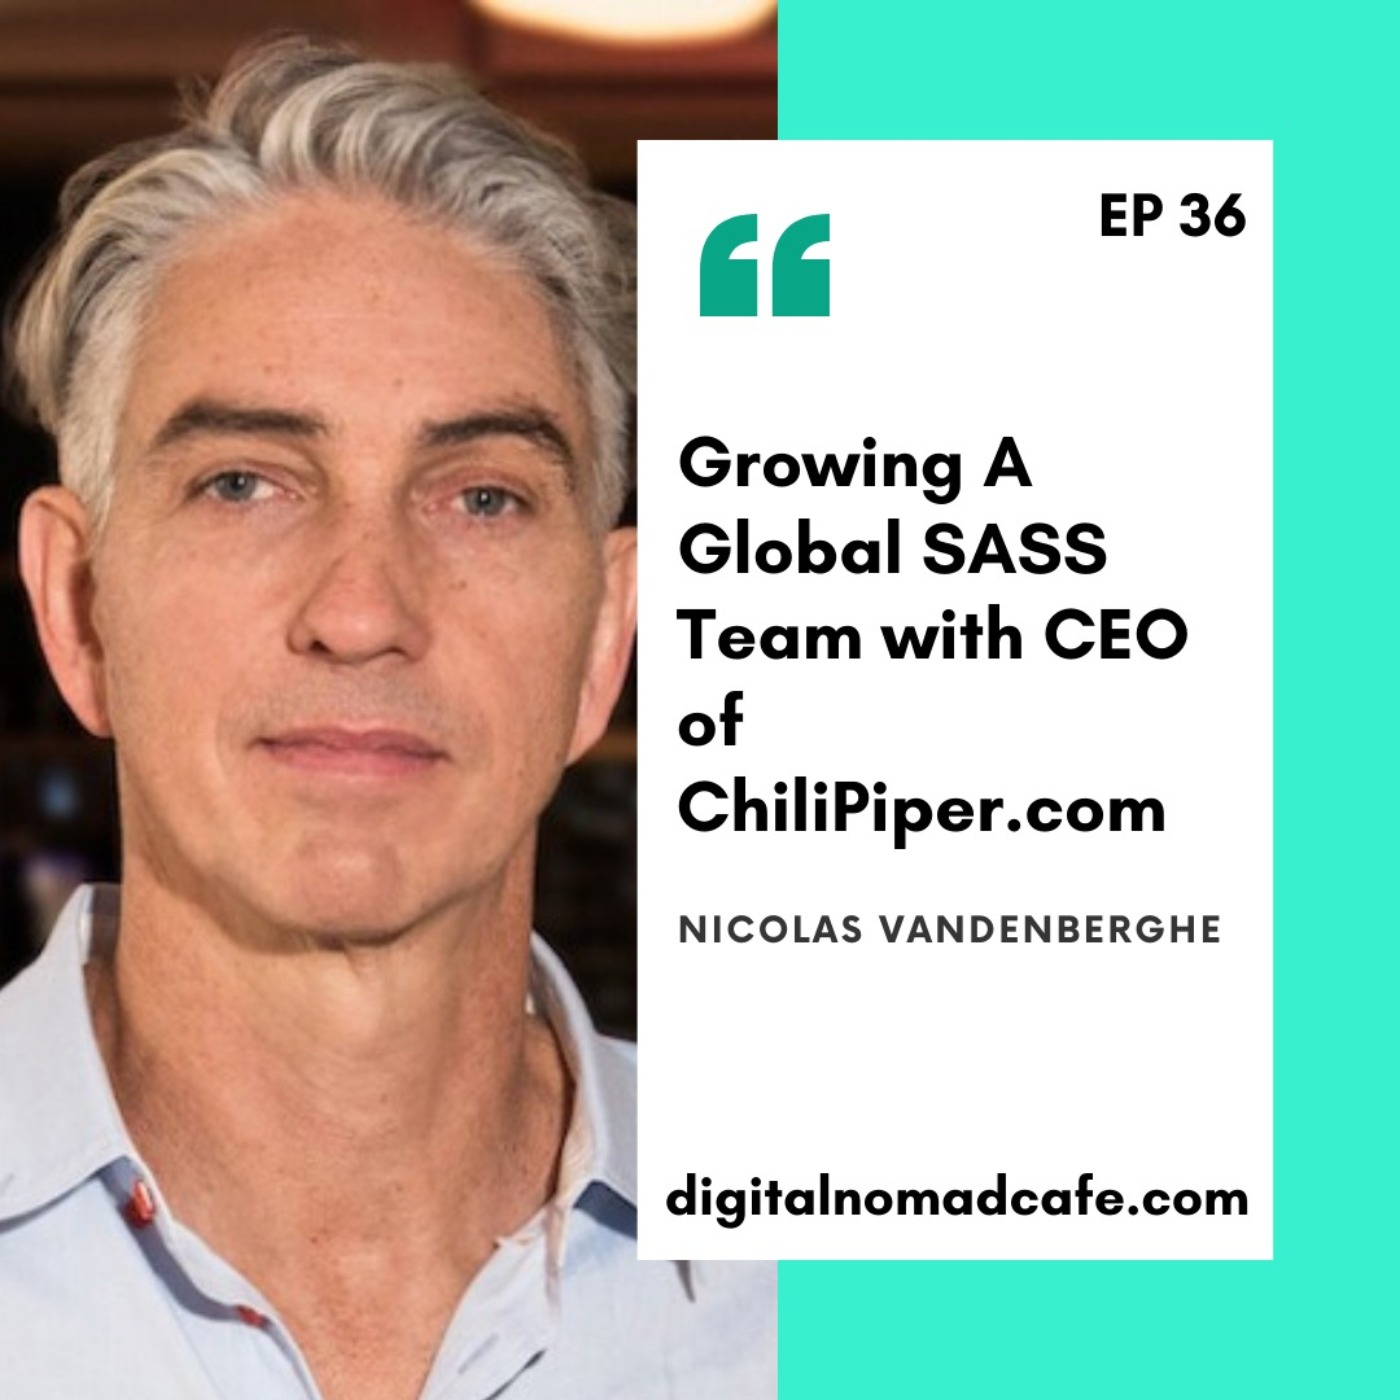 EP36: Growing A Global SASS Team with CEO of ChiliPiper.com Nicolas Vandenberghe